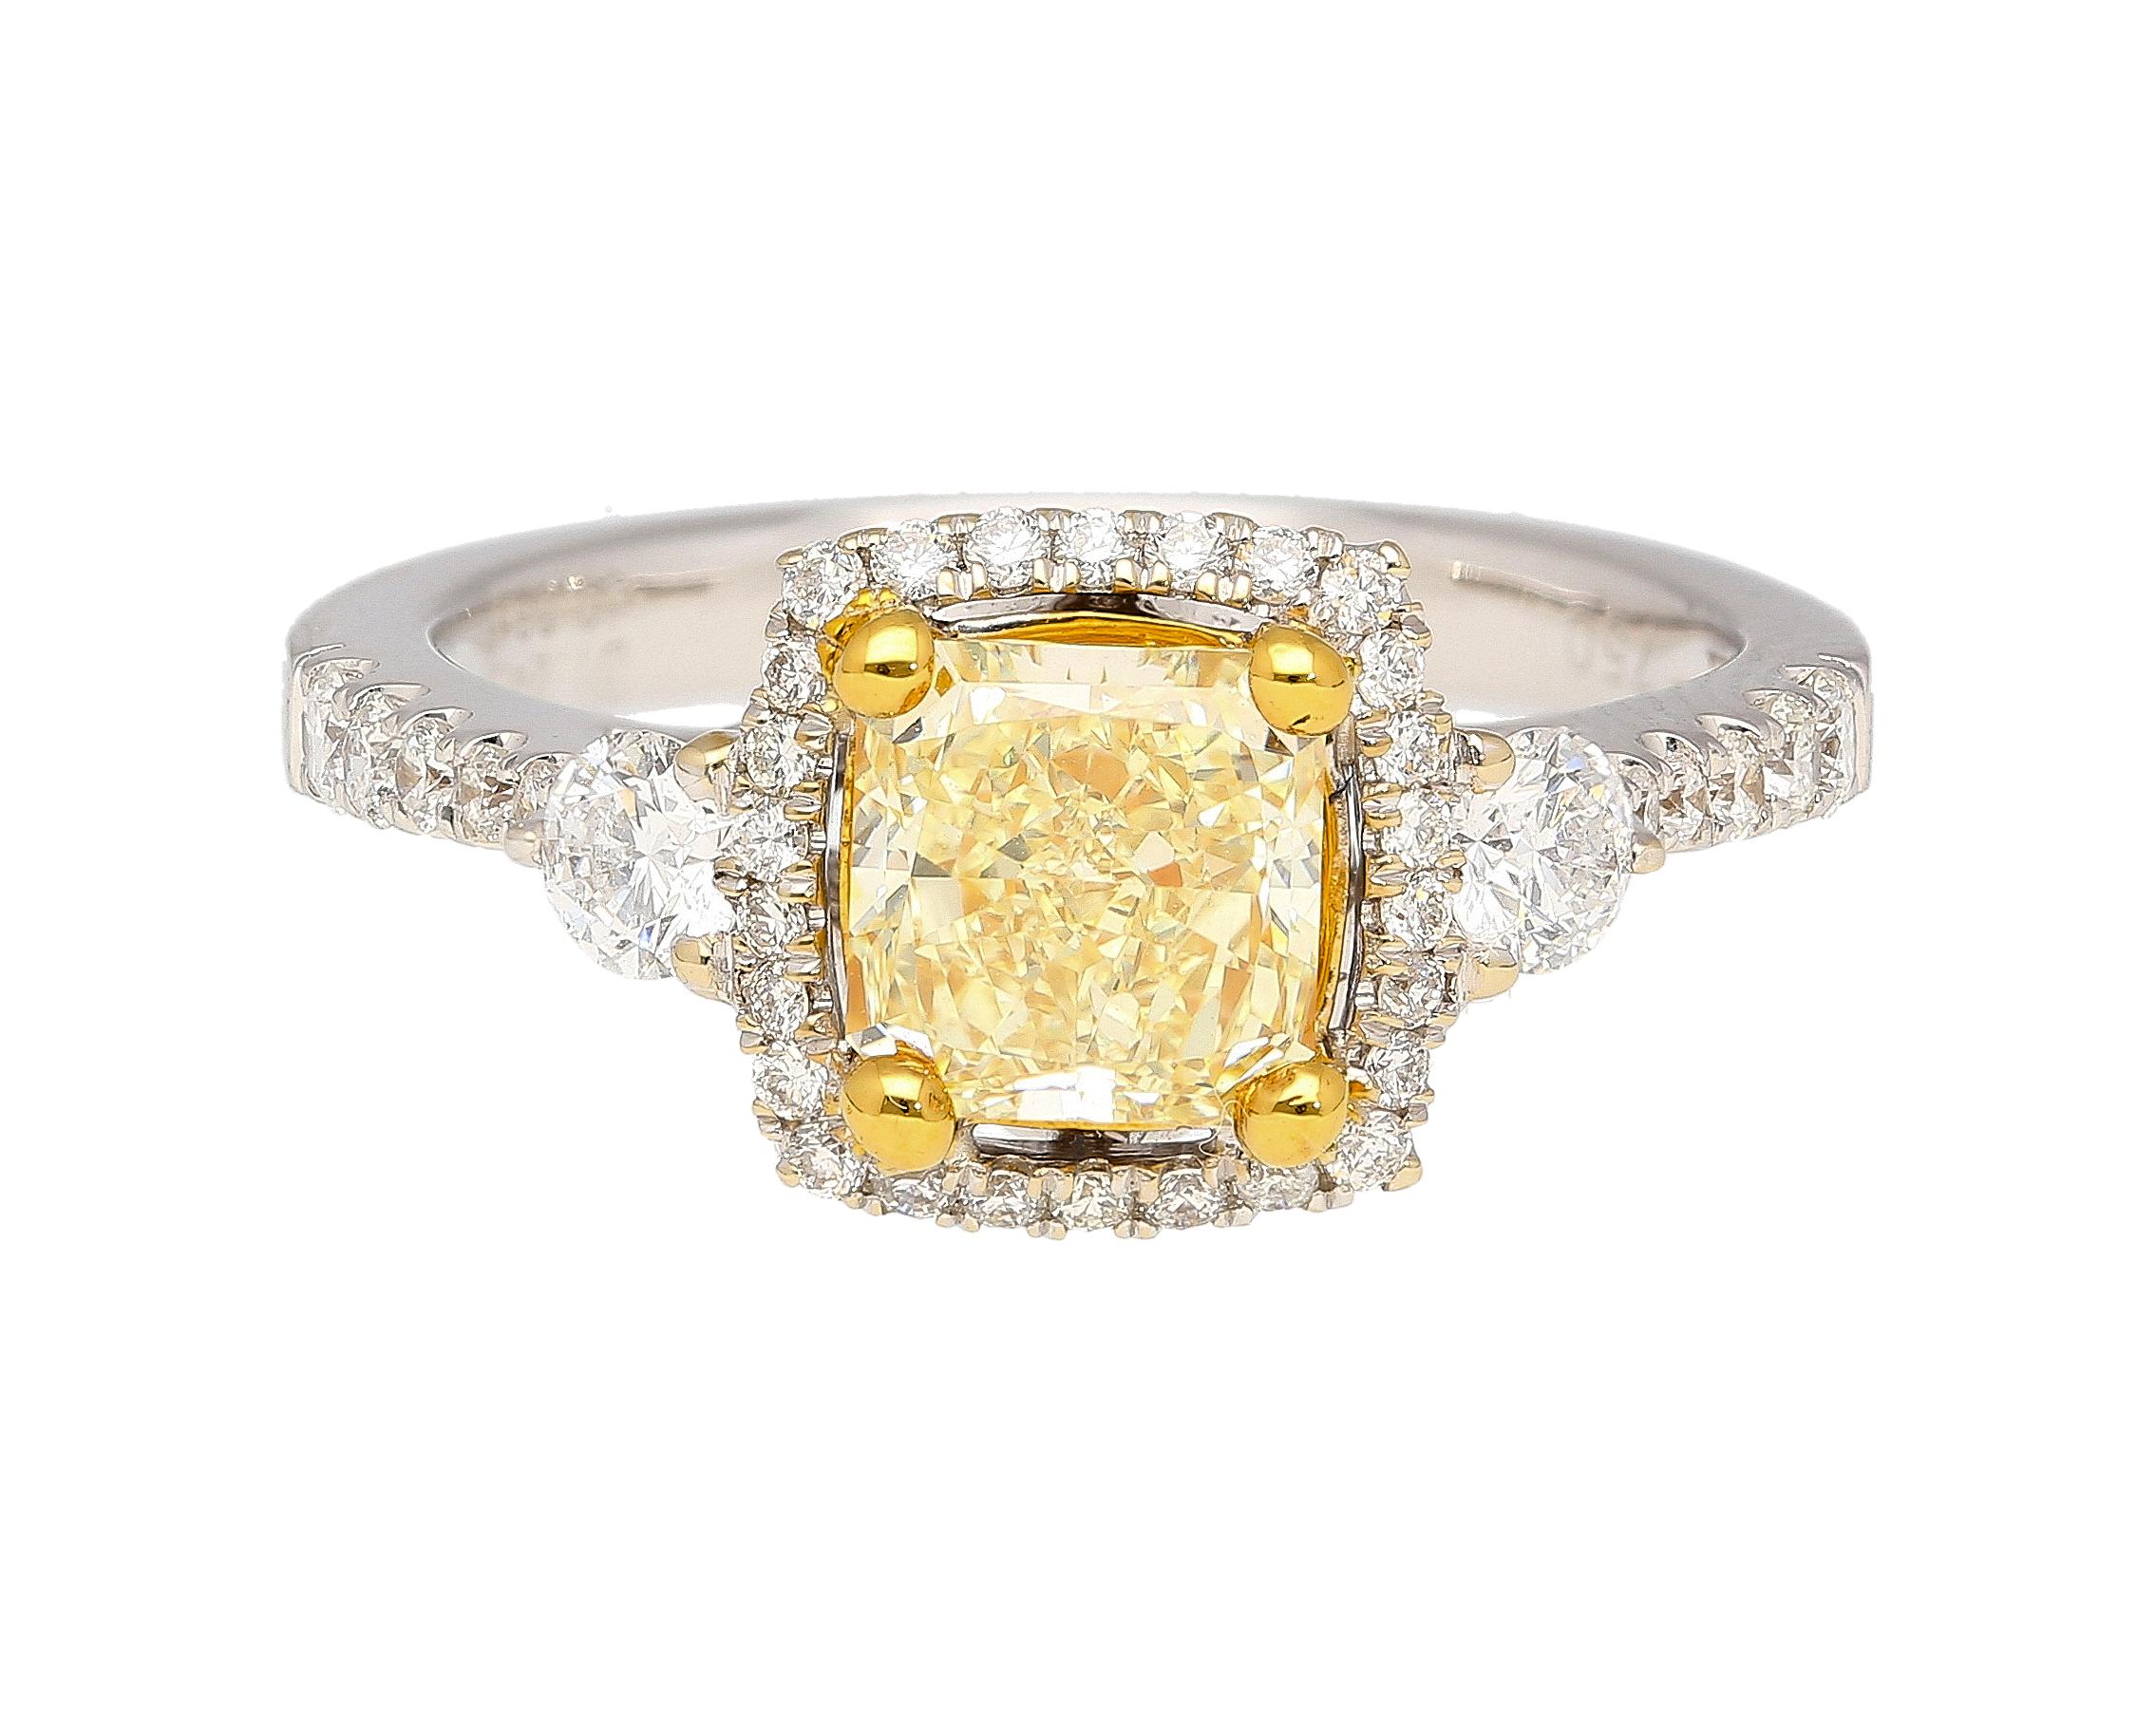 GIA Certified 1.24 Carat Radiant Cut Fancy Yellow Diamond Engagement Ring in 18K White and Yellow Gold. The stone is GIA certified as Y-Z color, meaning it has a yellow tint nearing a fancy yellow color. The certificate-graded Y-Z color is actually